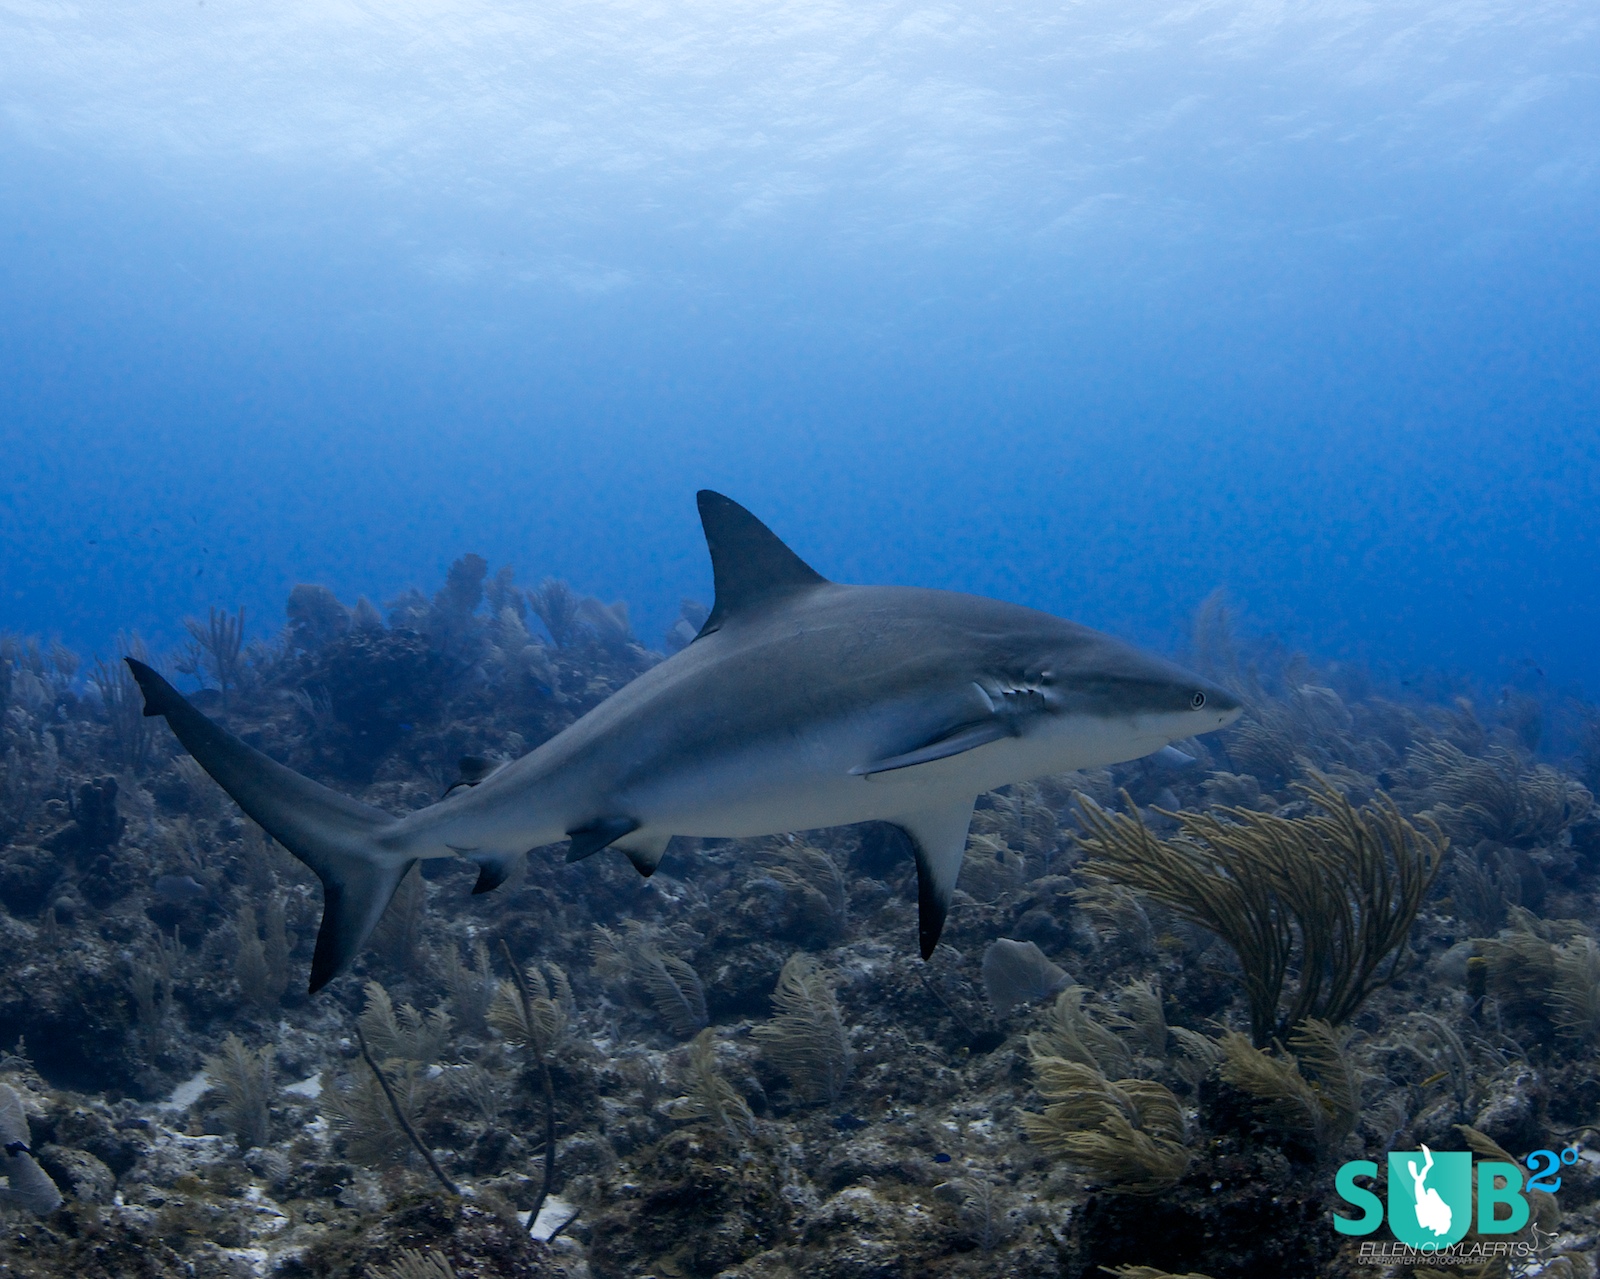 An arched back or fins down can be signs of irritation and might be signs to leave the scene, especially with less experienced divers in the group. Heartbeats tend to go up and sharks are very good at picking this up, with more bold behavior following.